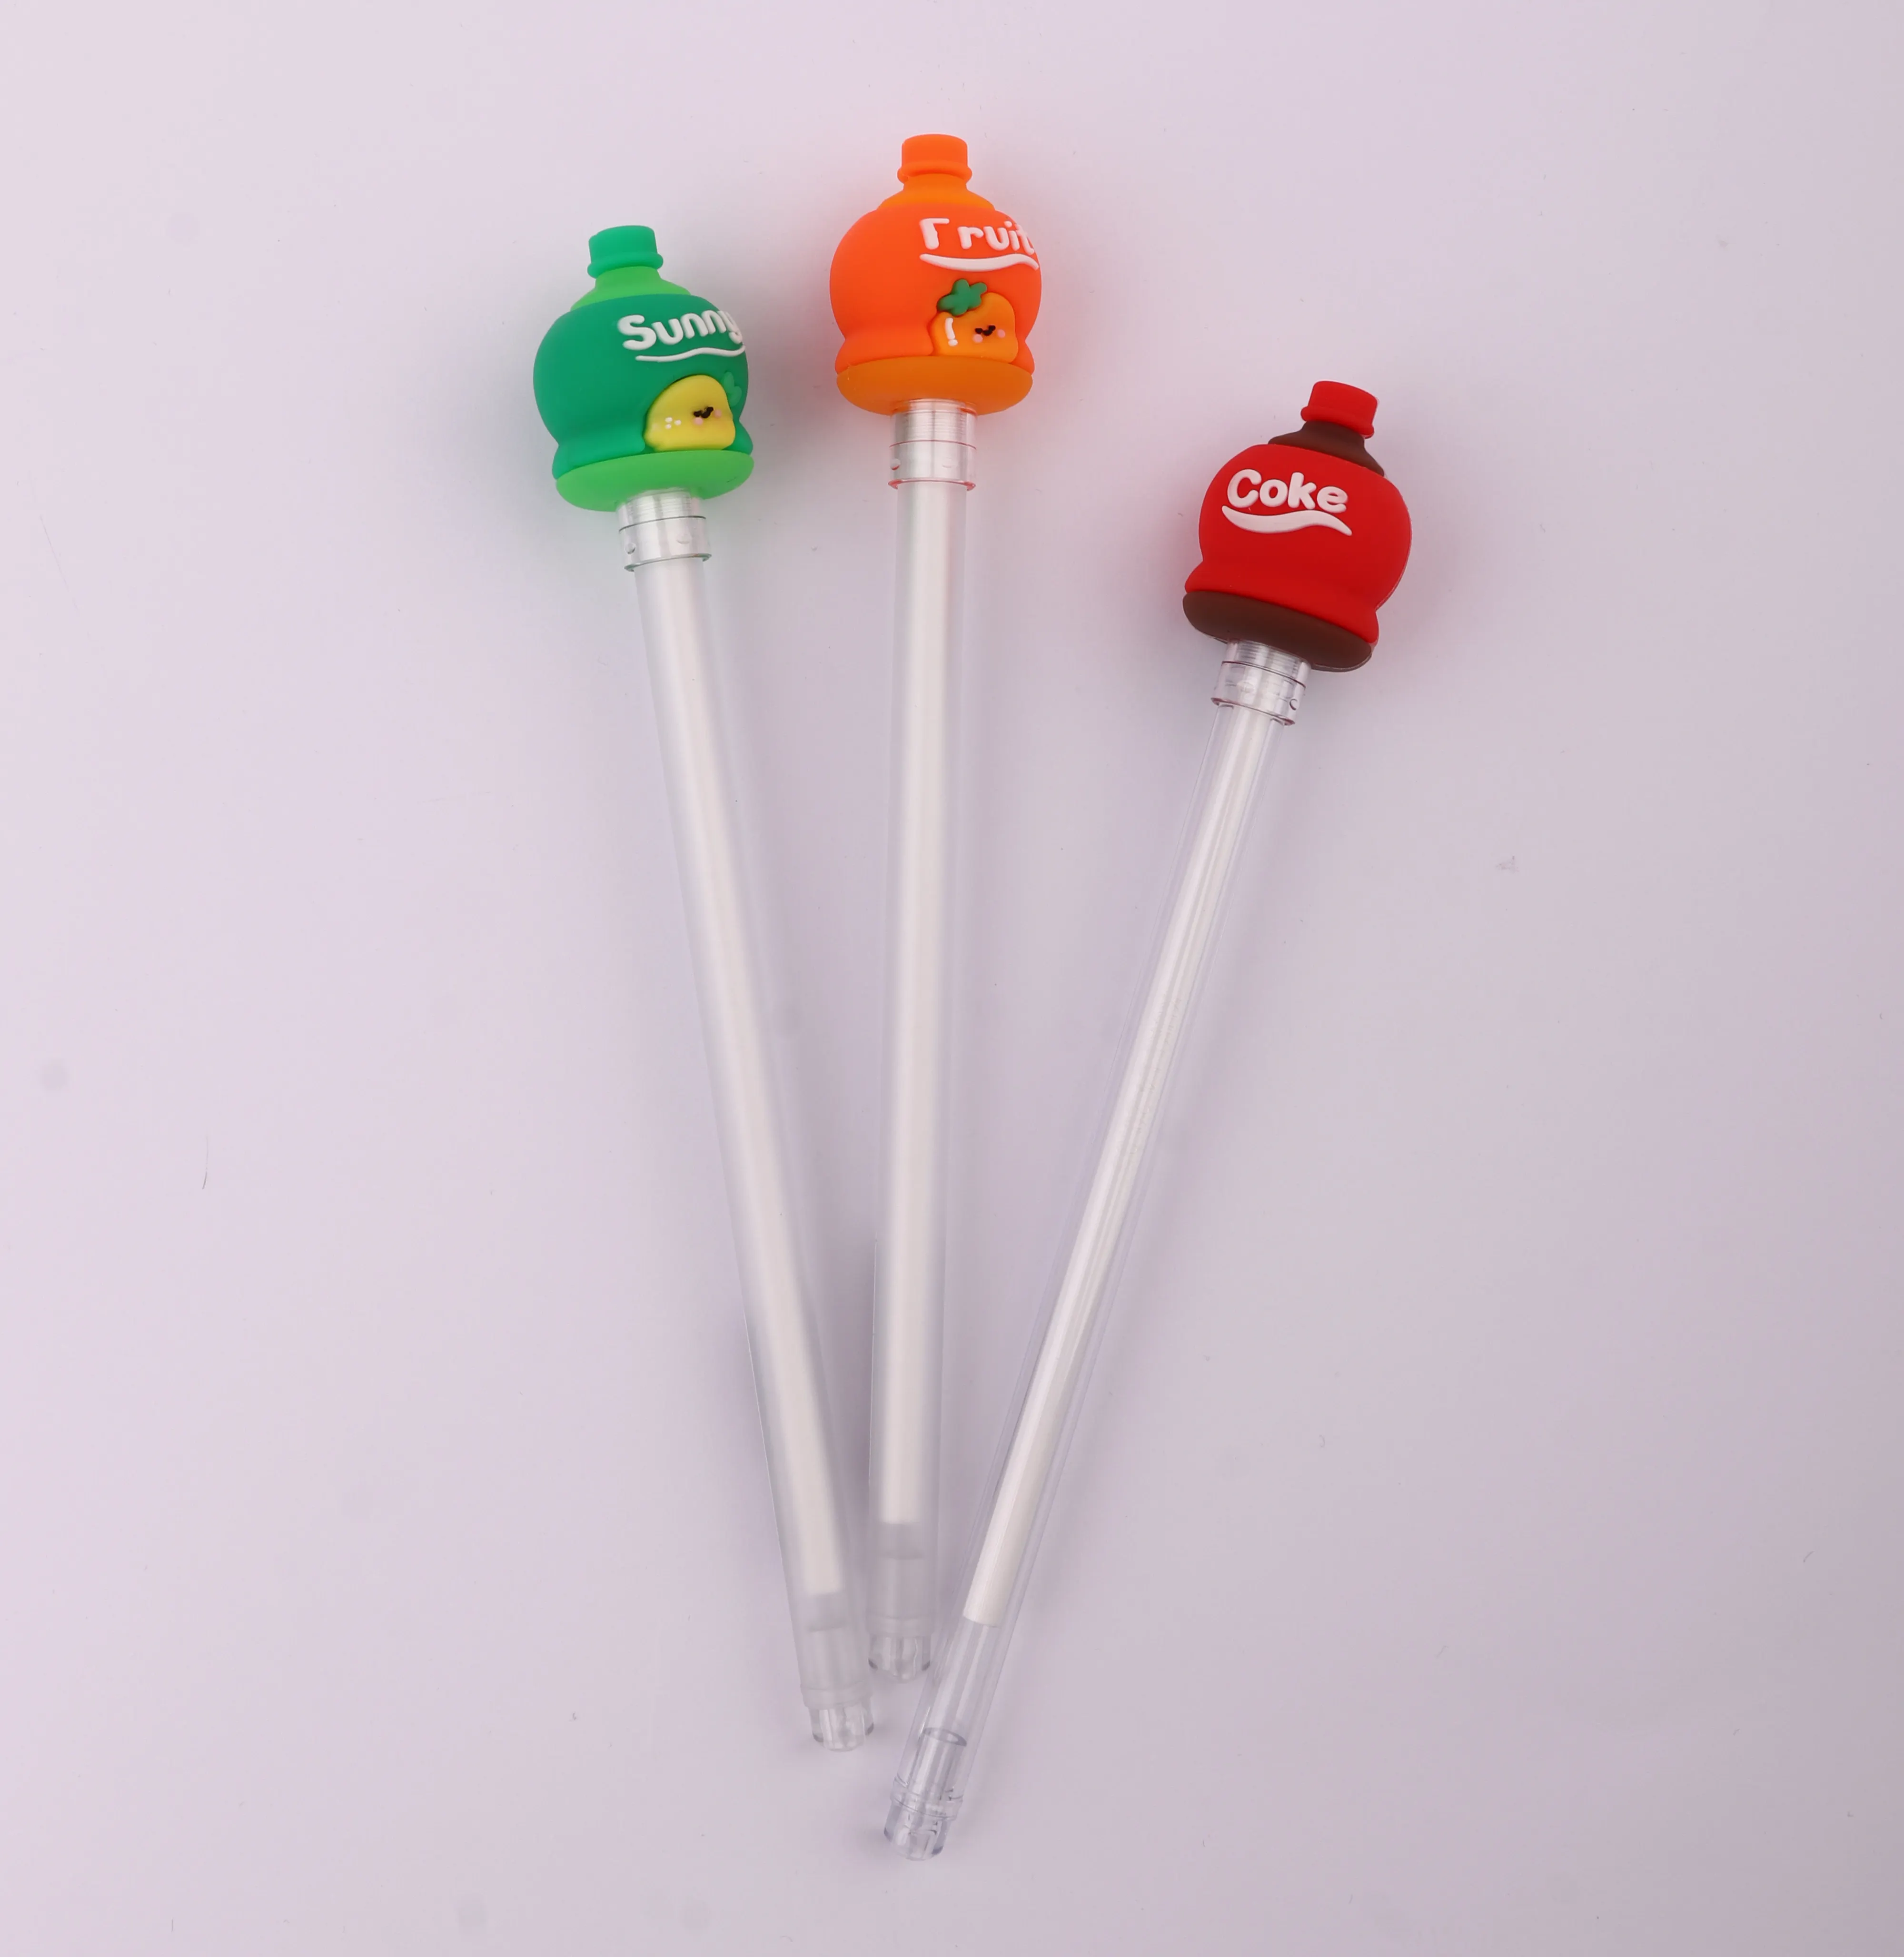 Pens Manufacturer Cute And Fashion Pull Series Soda Gel Pen For Kids Gift School Kawaii Stationery Pens